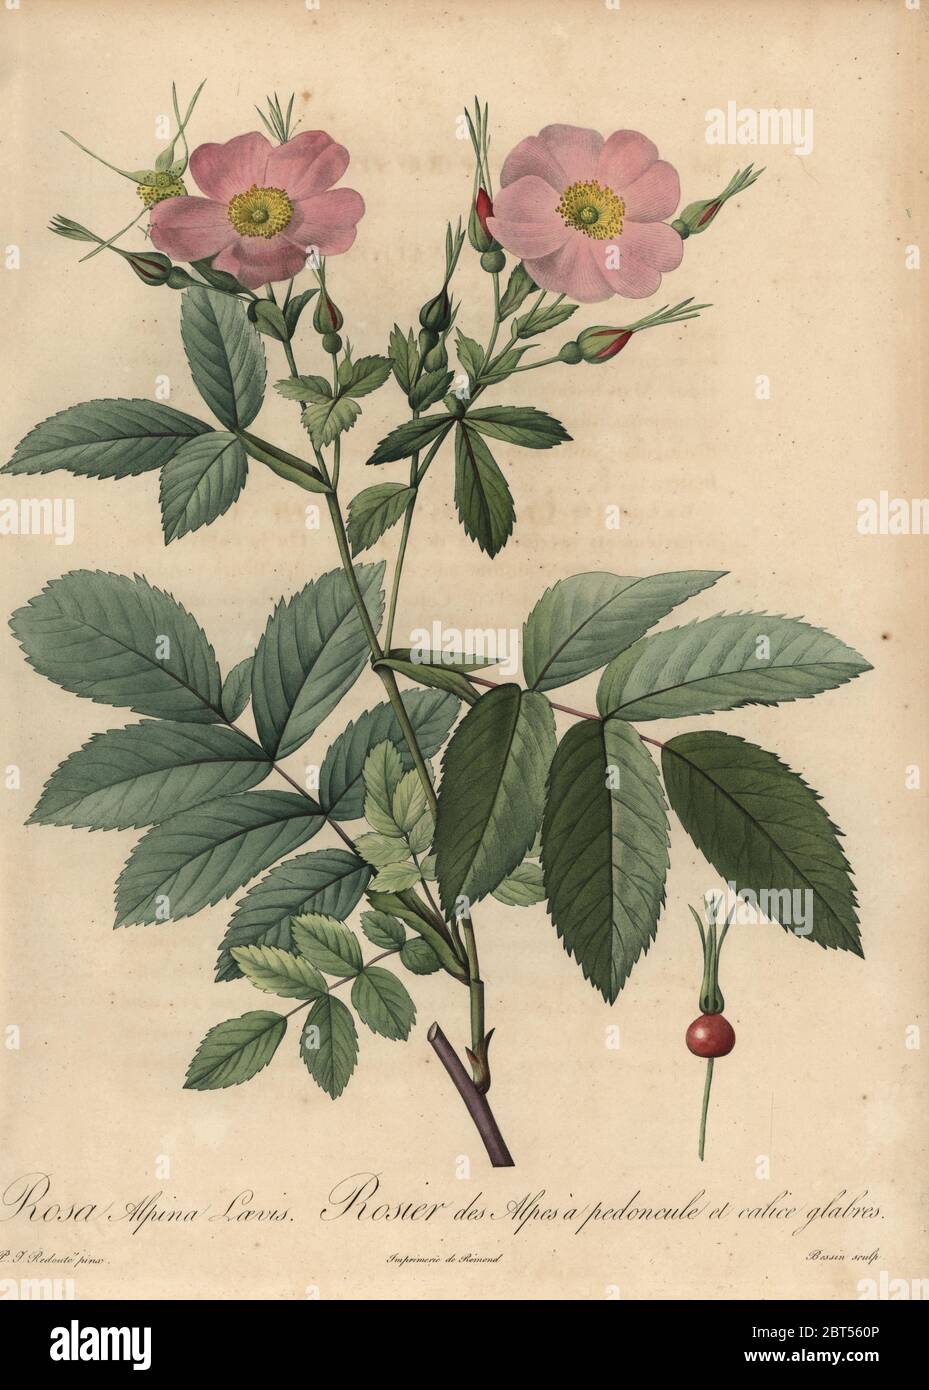 Pink alpine rose, Rosa pendulina. Rosa alpina Laevis, Rosier des Alpes a pedoncule et calice glabres. Stipple copperplate engraving by Rosine-Antoinette Bessin handcoloured a la poupee after a botanical illustration by Pierre-Joseph Redoute from the first folio edition of Les Roses, Firmin Didot, Paris, 1817. Stock Photo